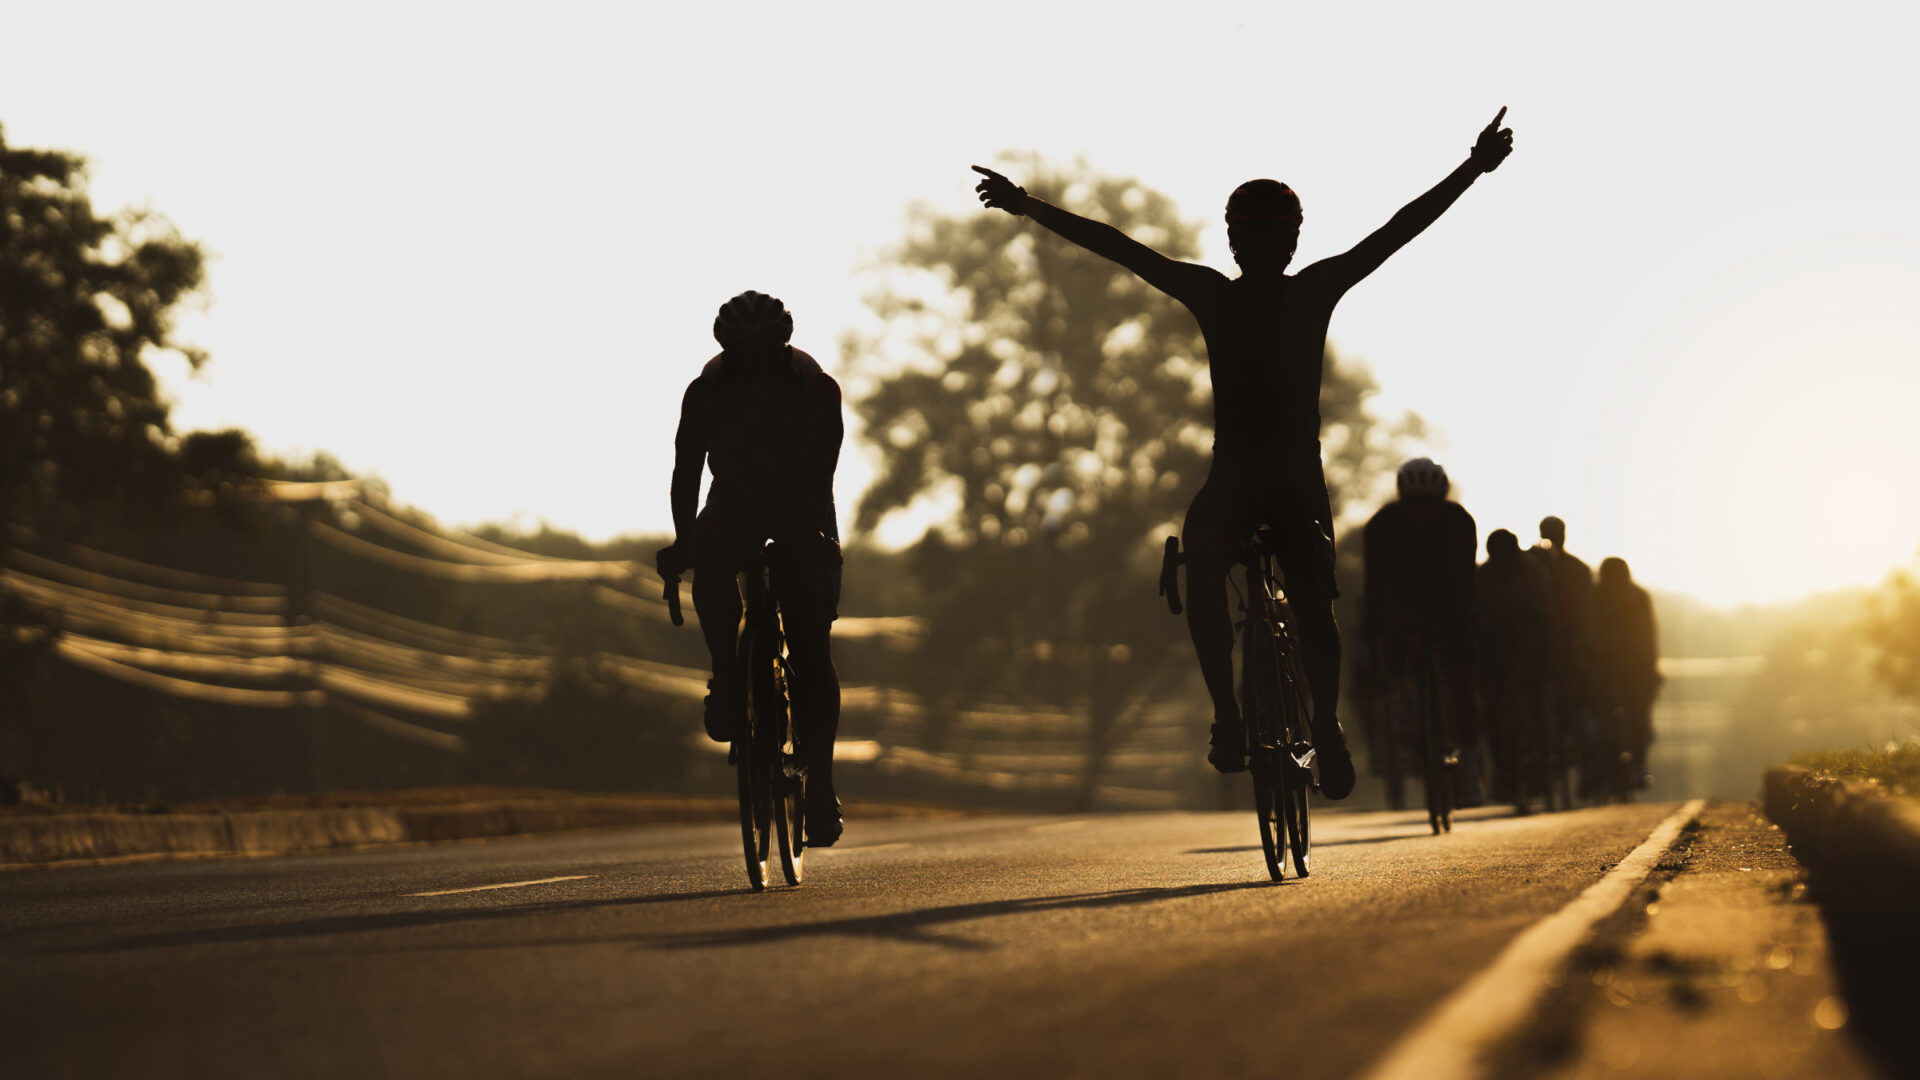 Silhouettes of cyclists riding in a group, with one holding their arms overhead